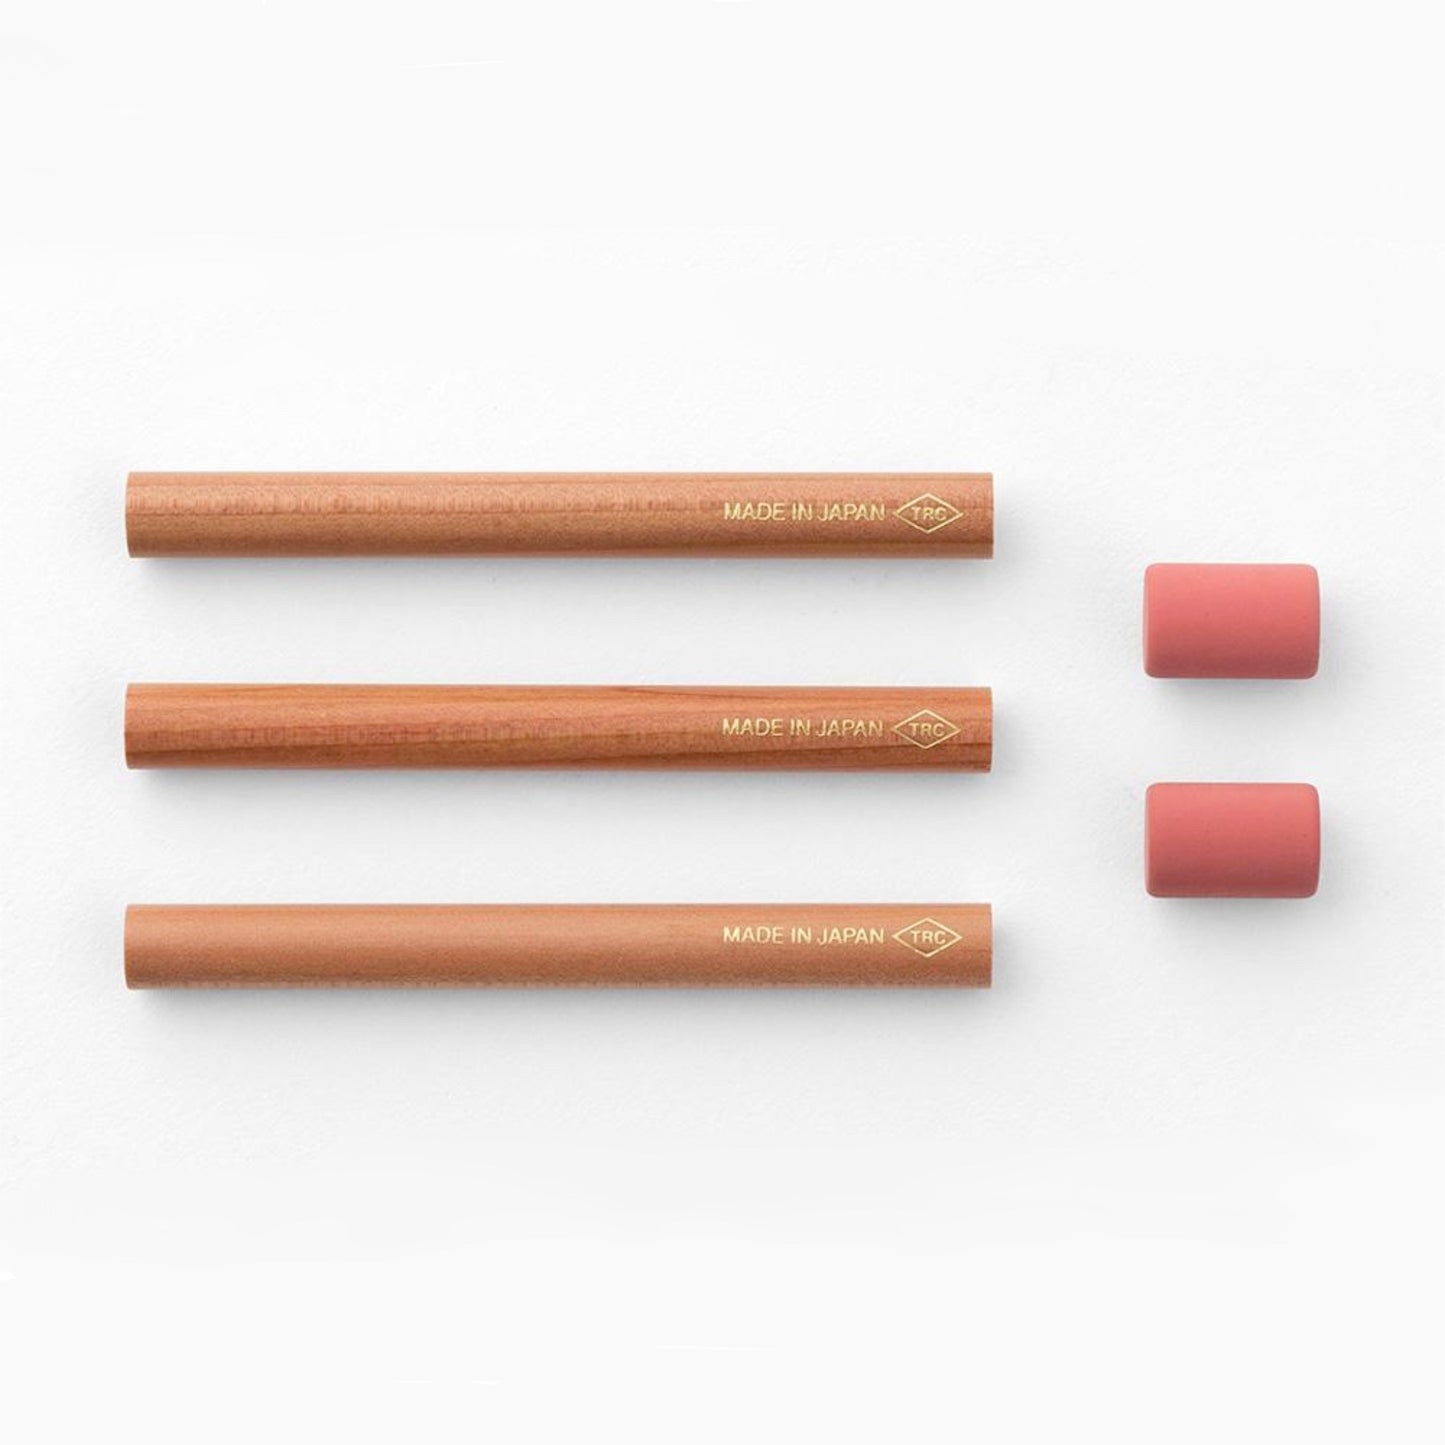 pencil and erasers